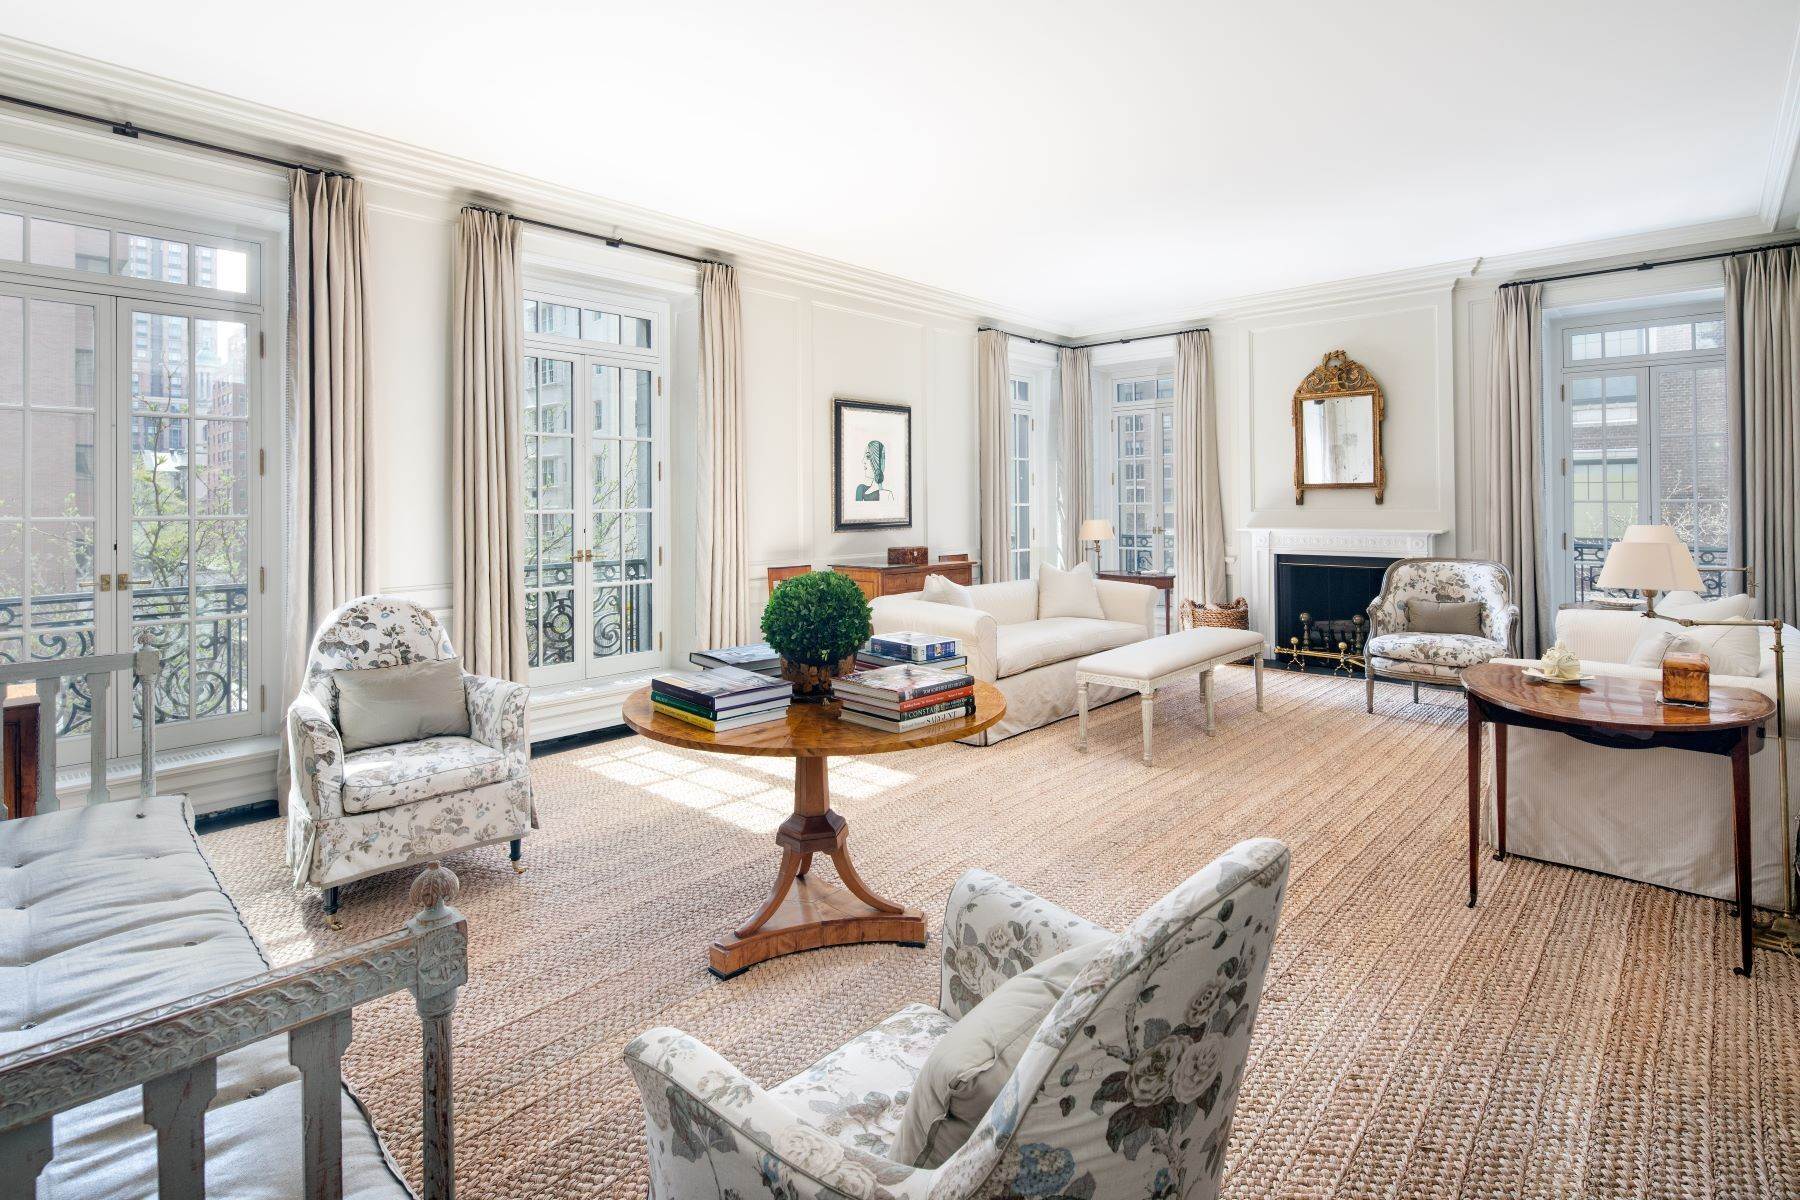 Co-op Properties for Sale at 840 Park Avenue, 3/4A New York, New York 10075 United States